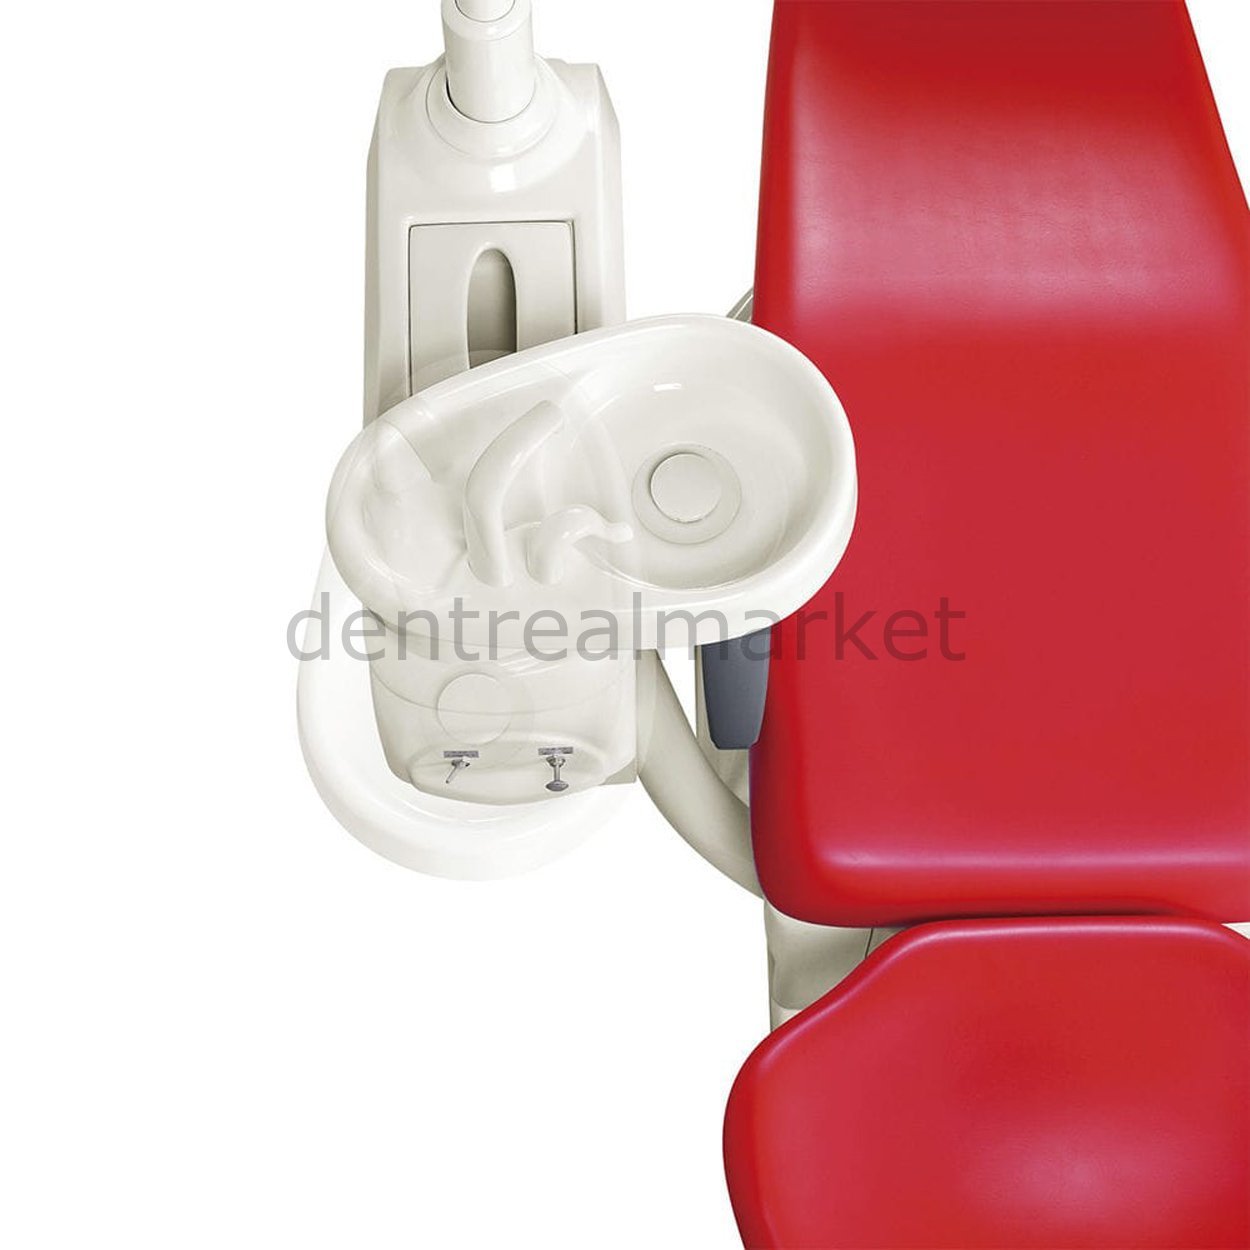 Dentreal Dental Unit With Chair